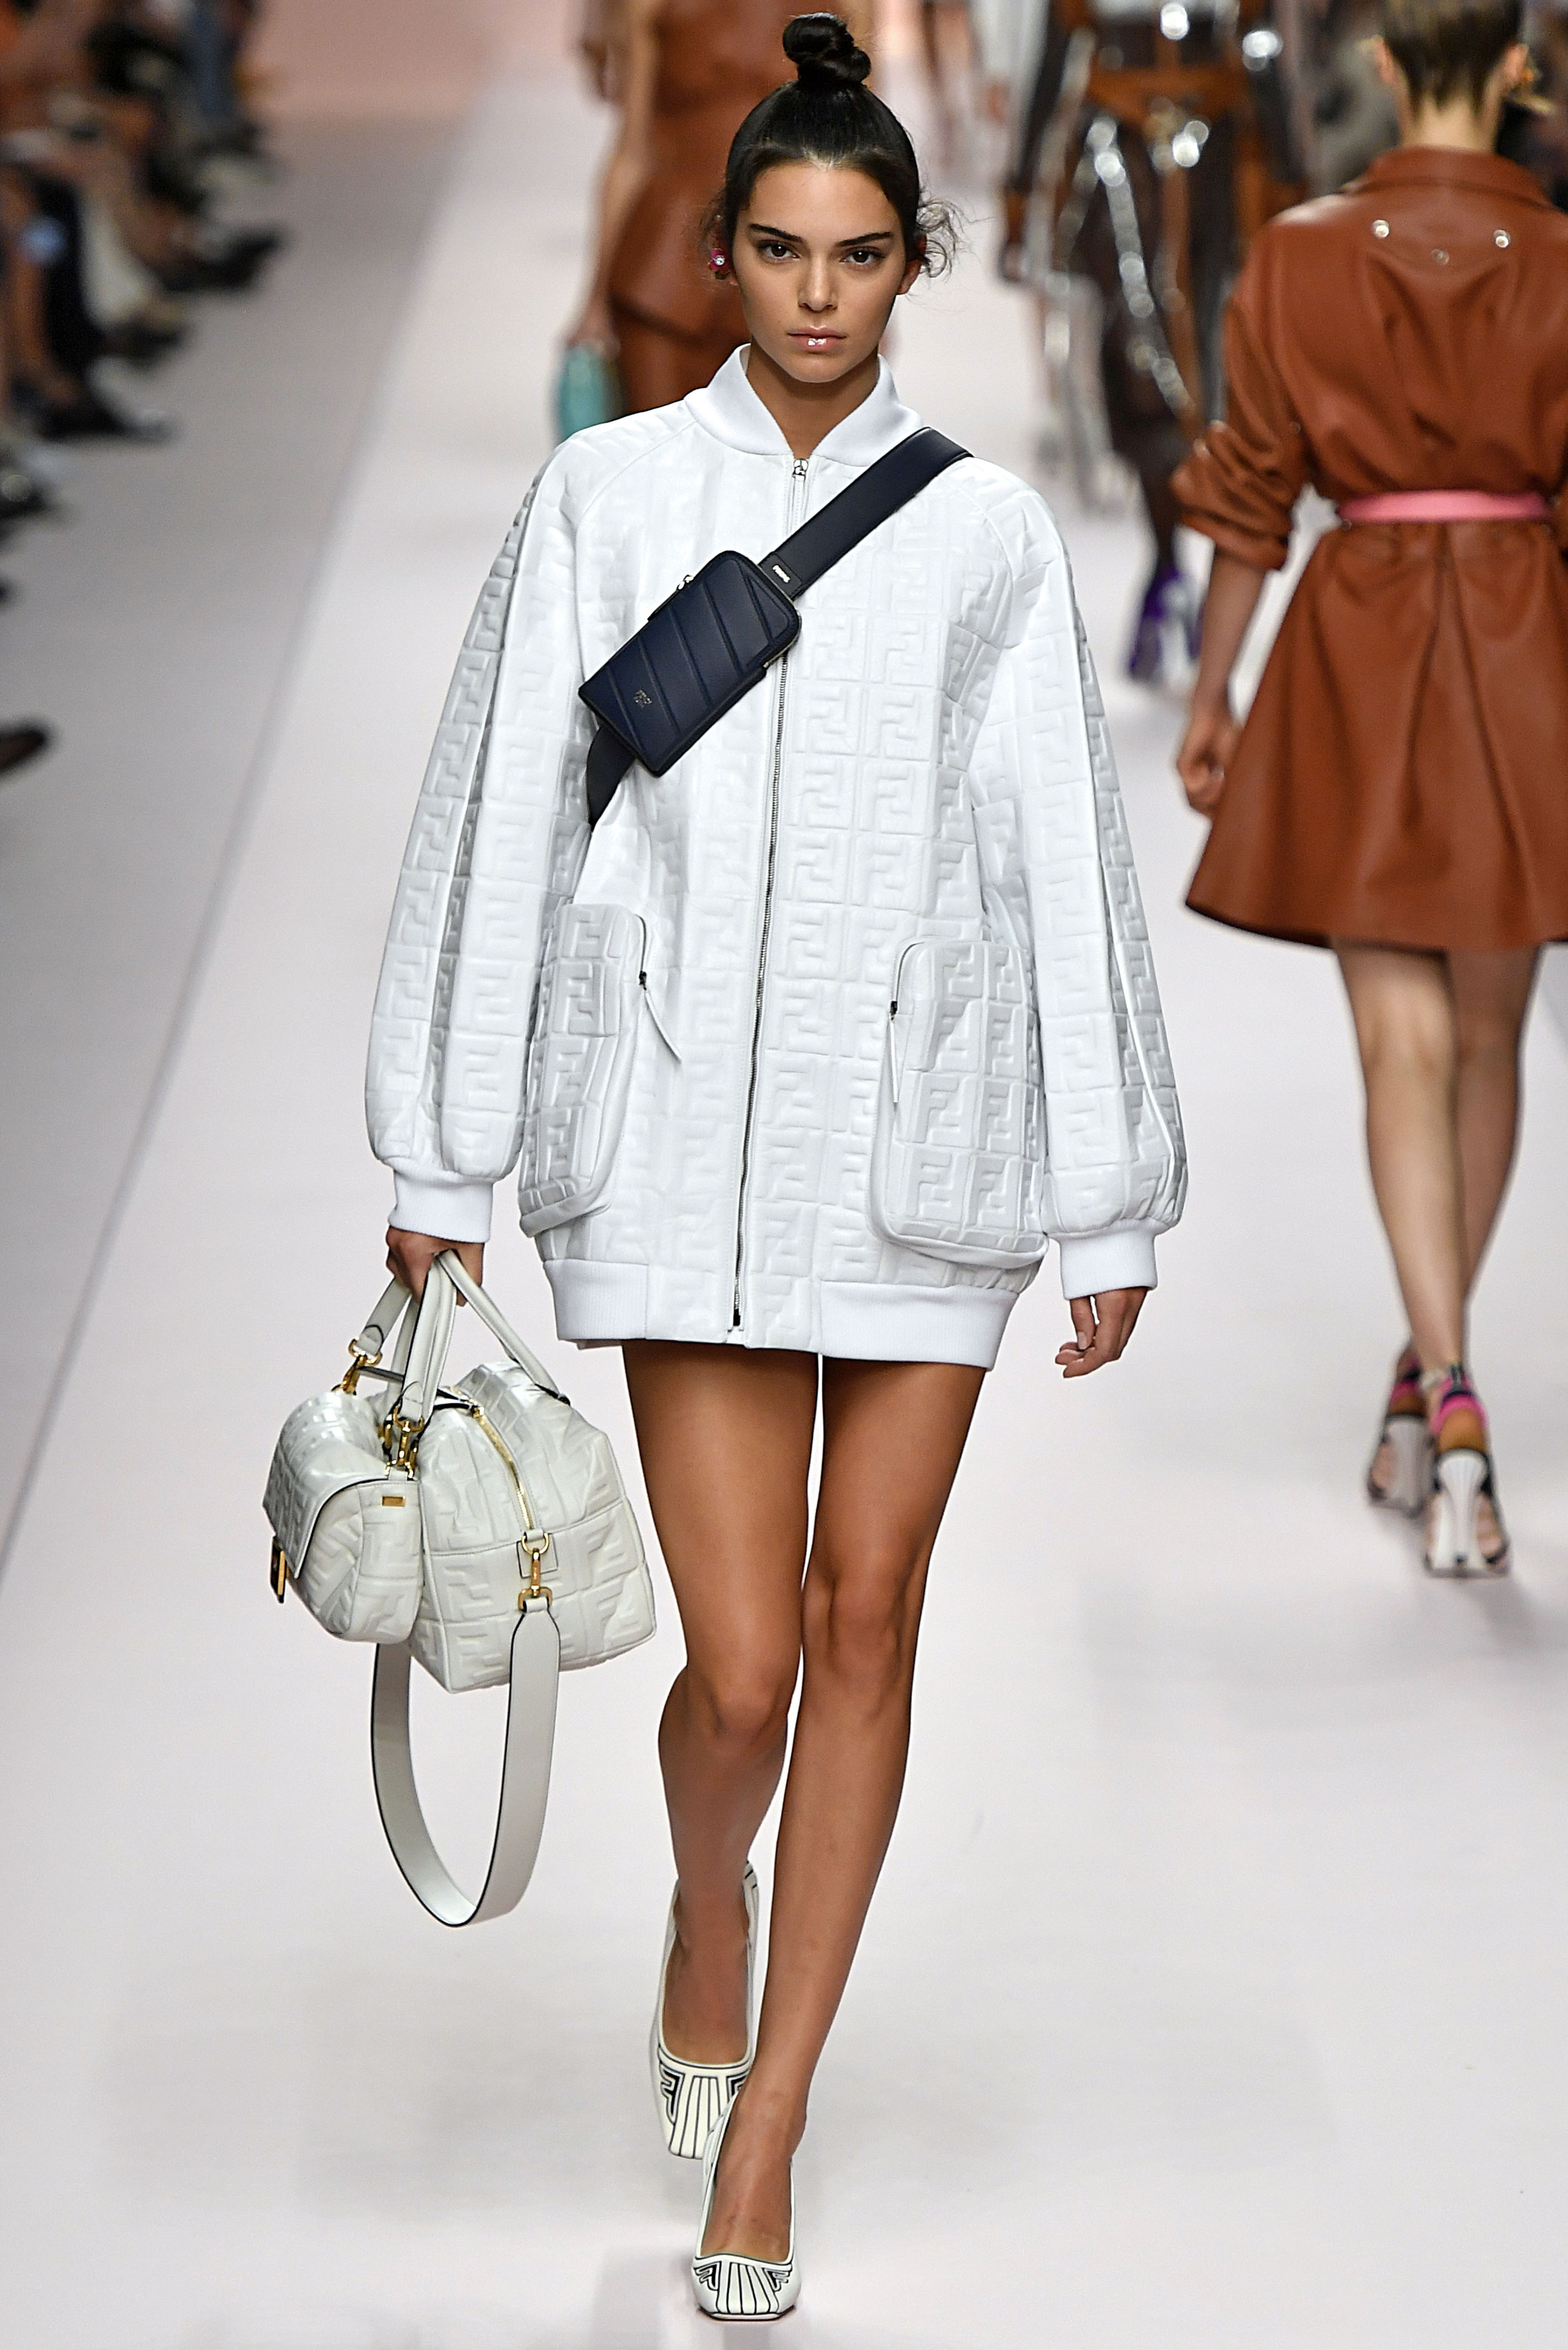 Everybody Is Talking About The Fendi Show In Milan - Grazia